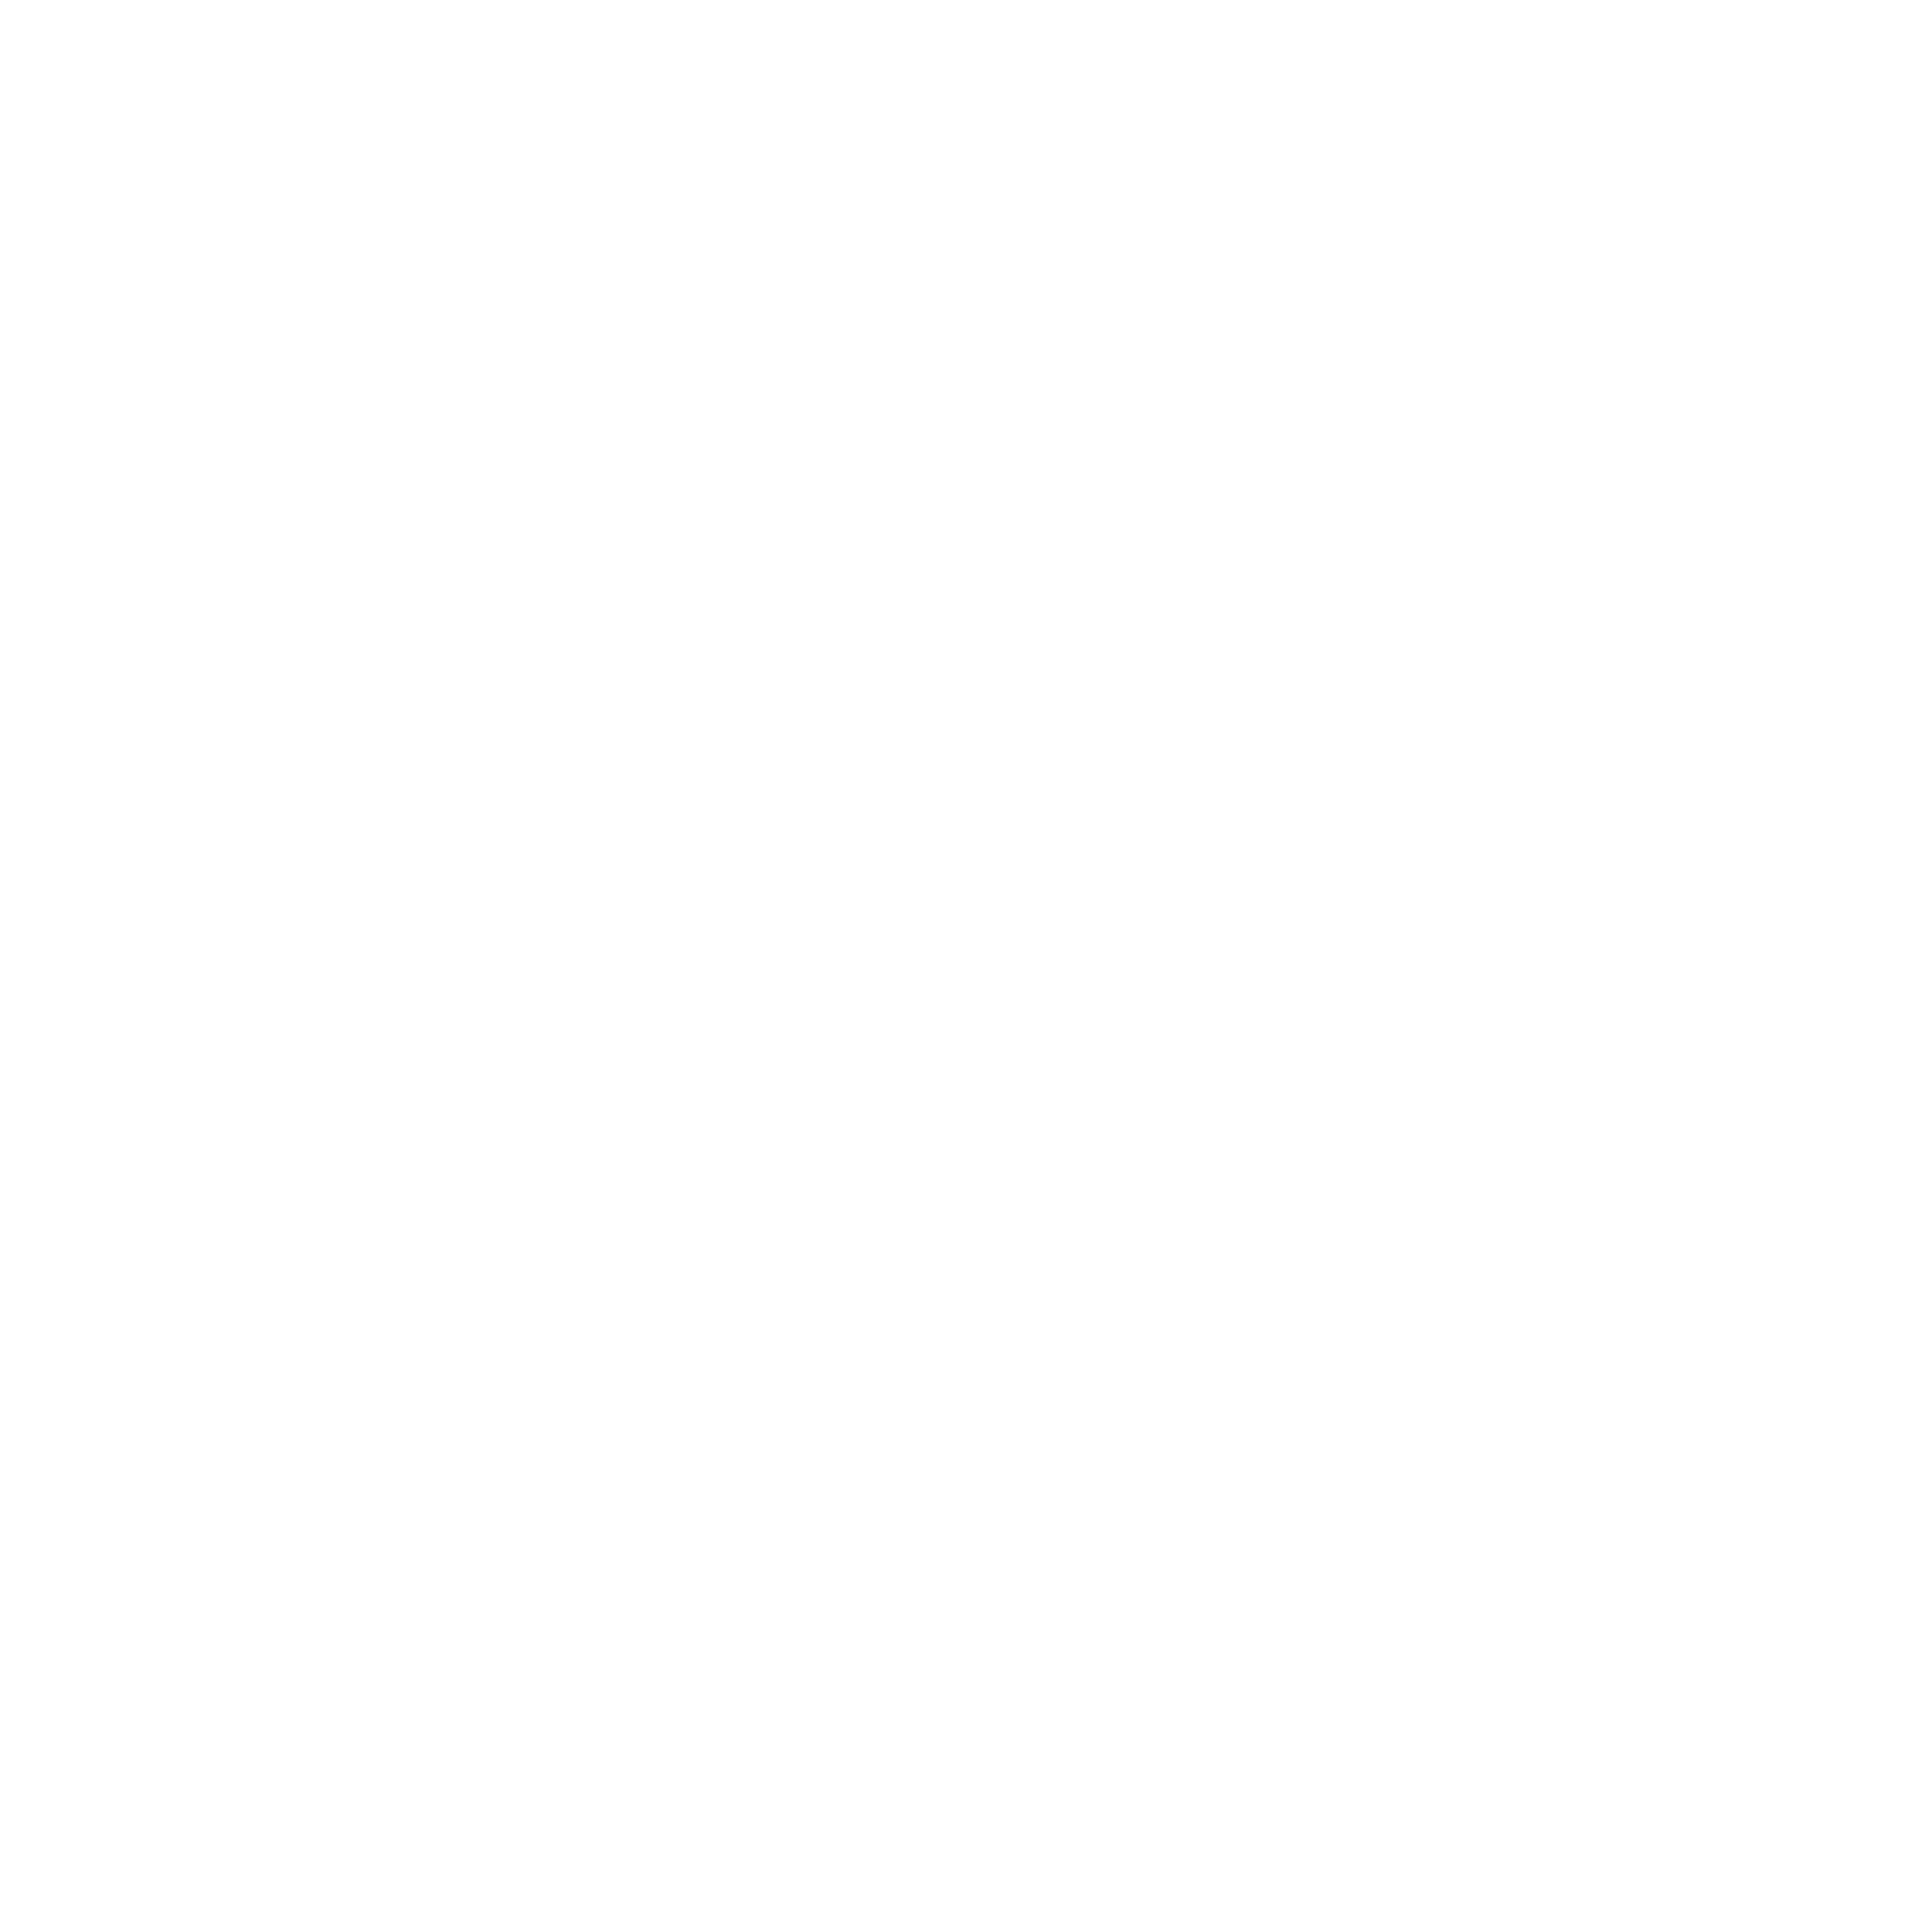 Table Manners Records